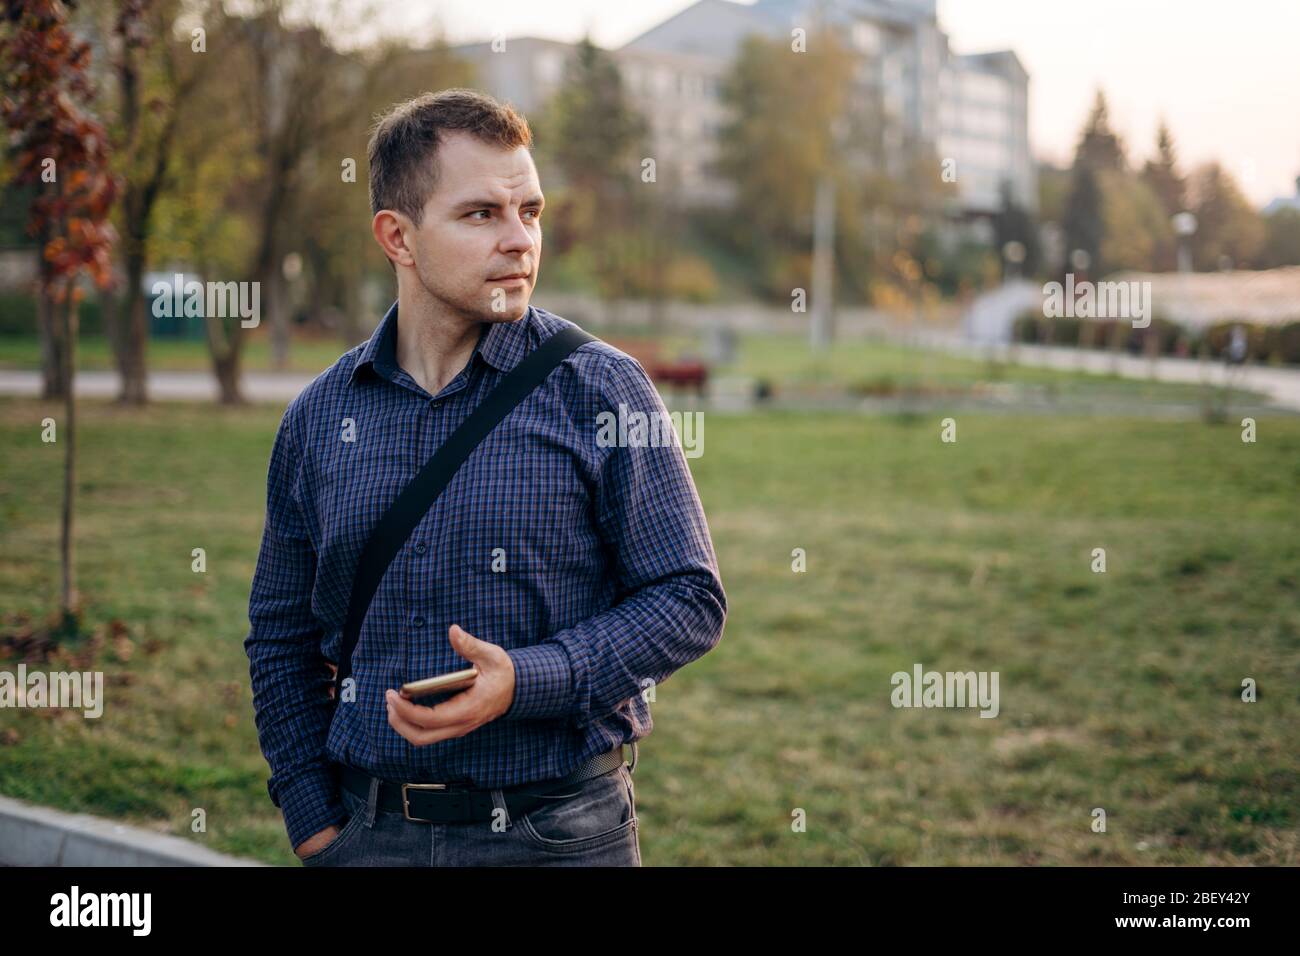 A man in a blue shirt stands in the park. A man holds his phone and walks in the park Stock Photo